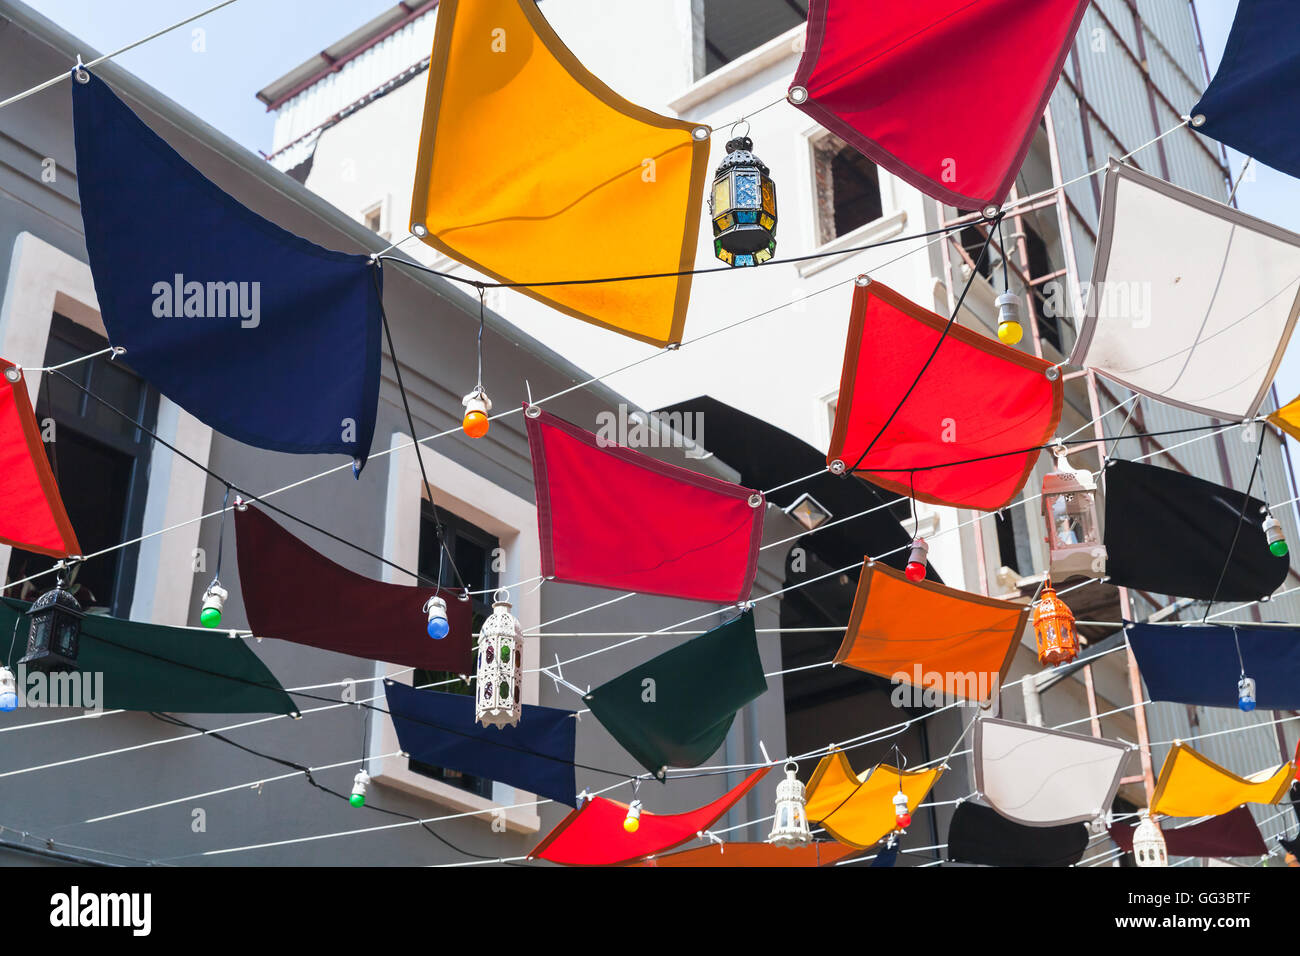 Colorful flags and street lamps. Istanbul, Turkey Stock Photo